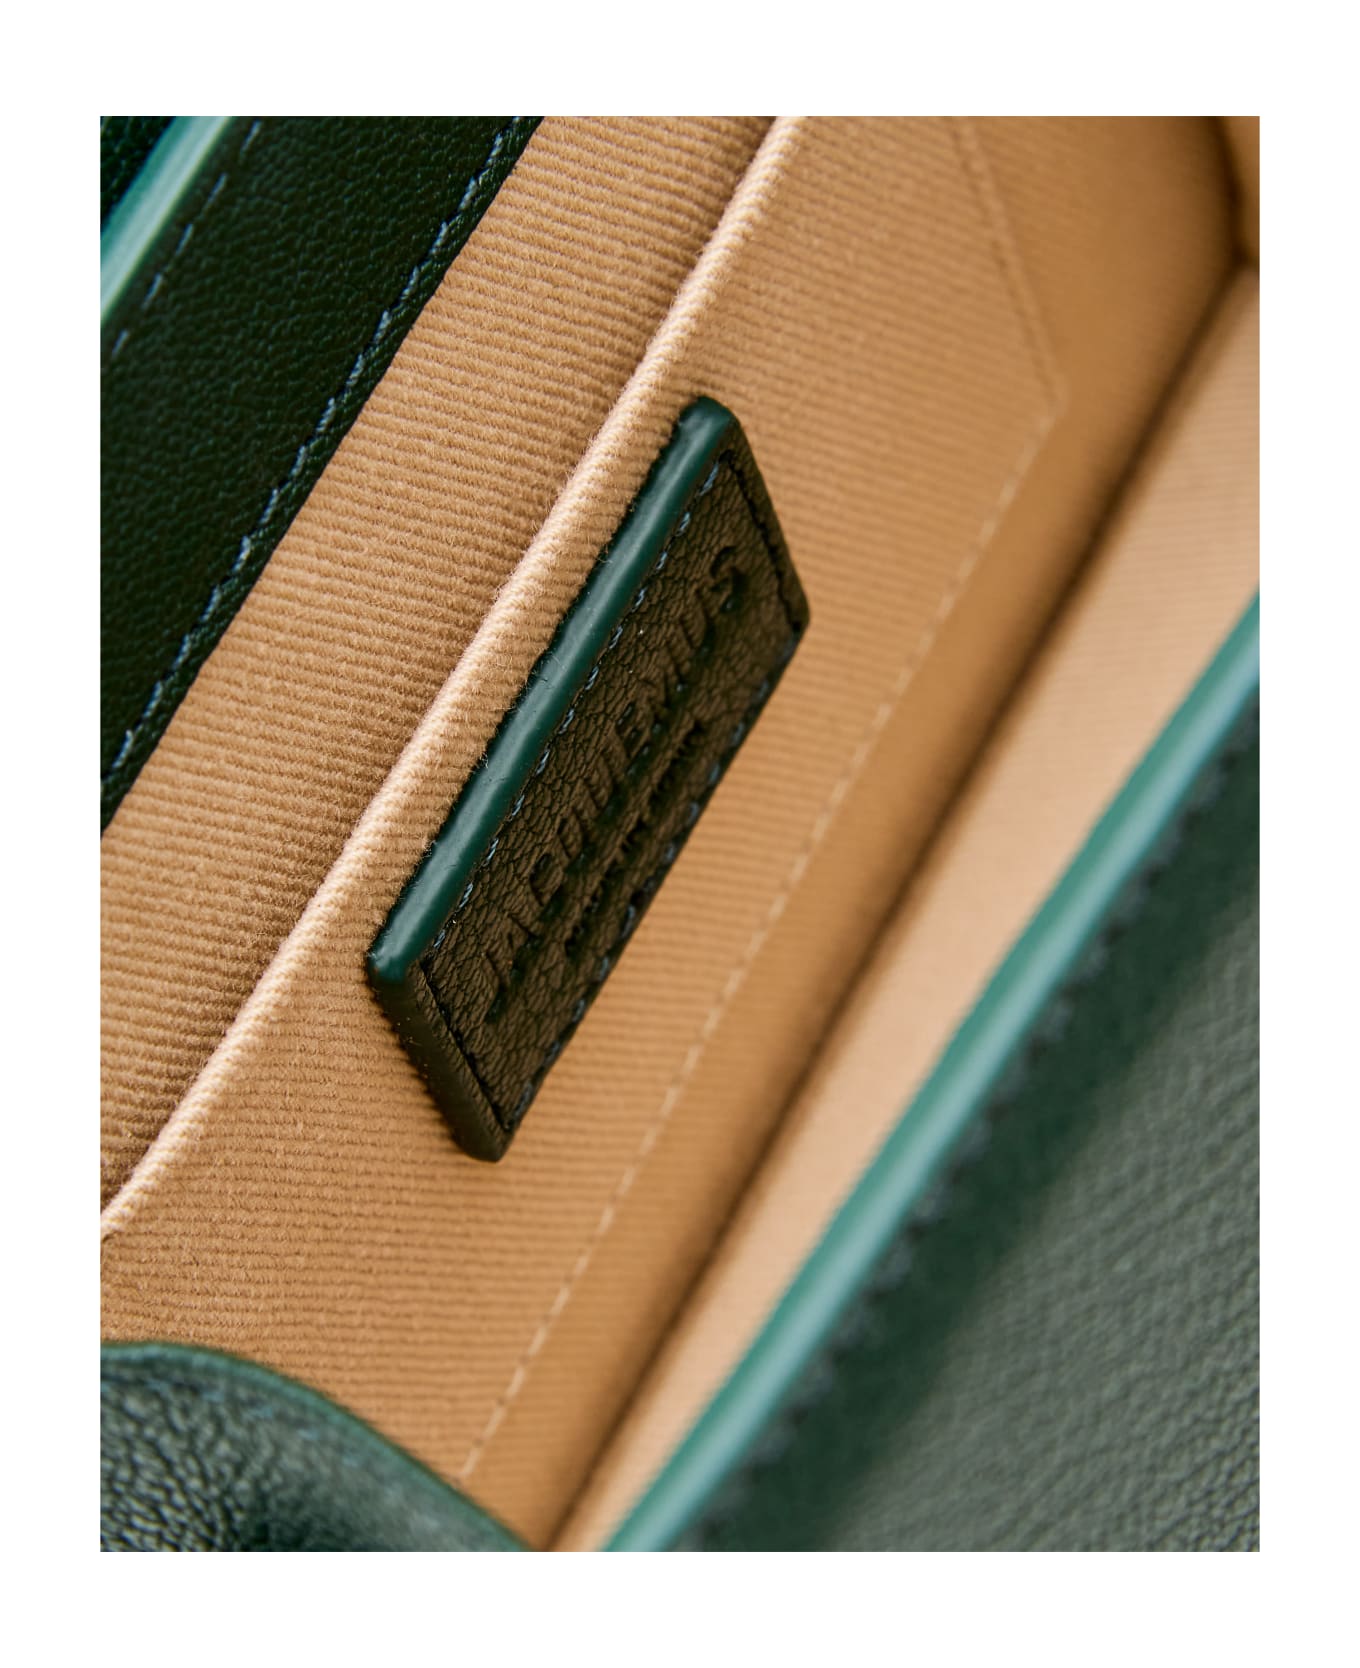 Jacquemus Le Chiquito Noeud Leather Shoulder Bag - Green